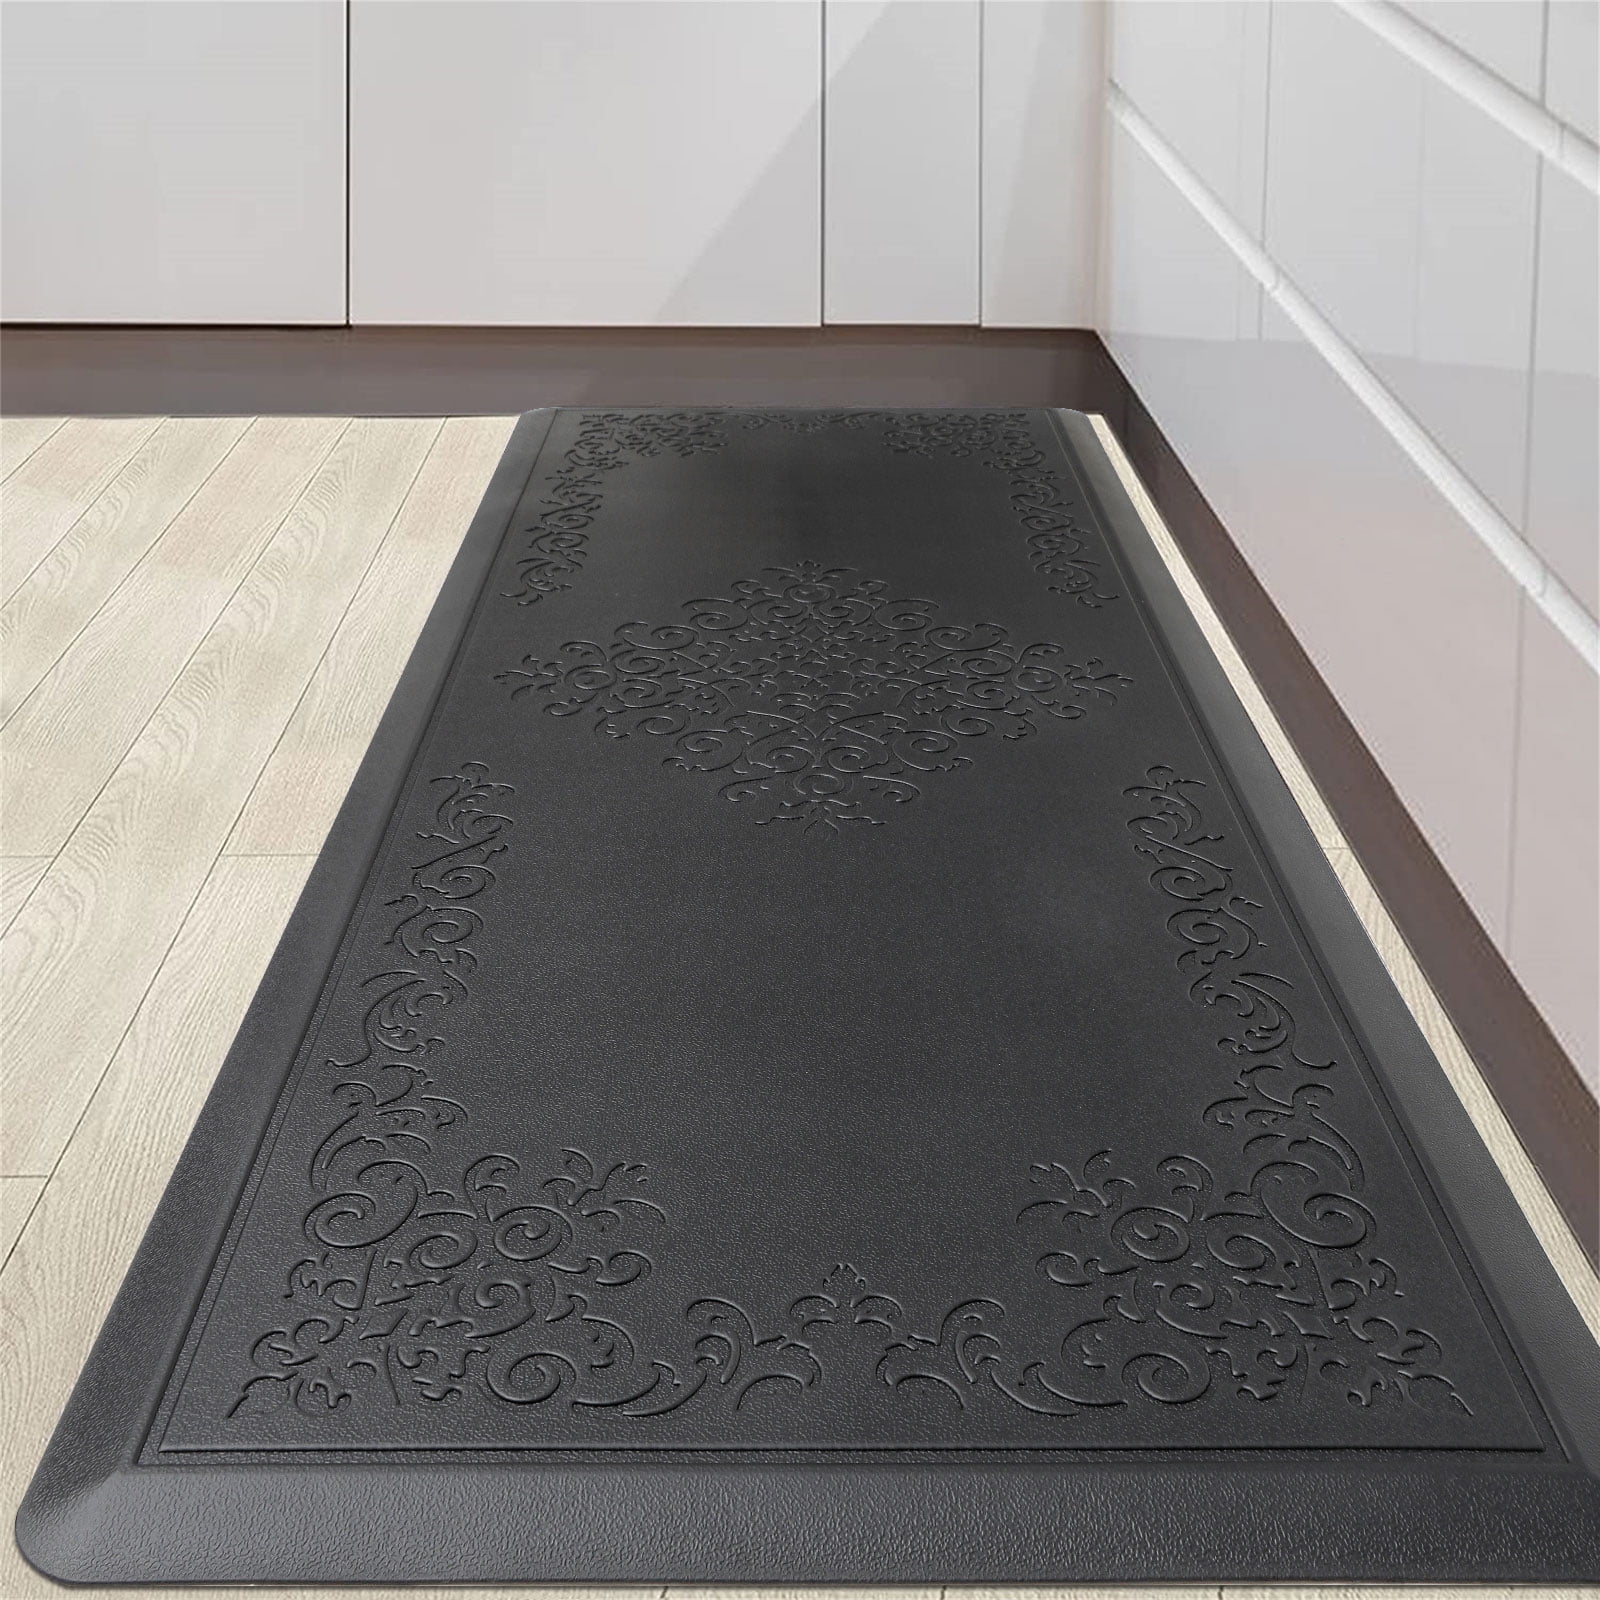 Types of Floor Mats: Entry, Kitchen, Anti-Fatigue & More